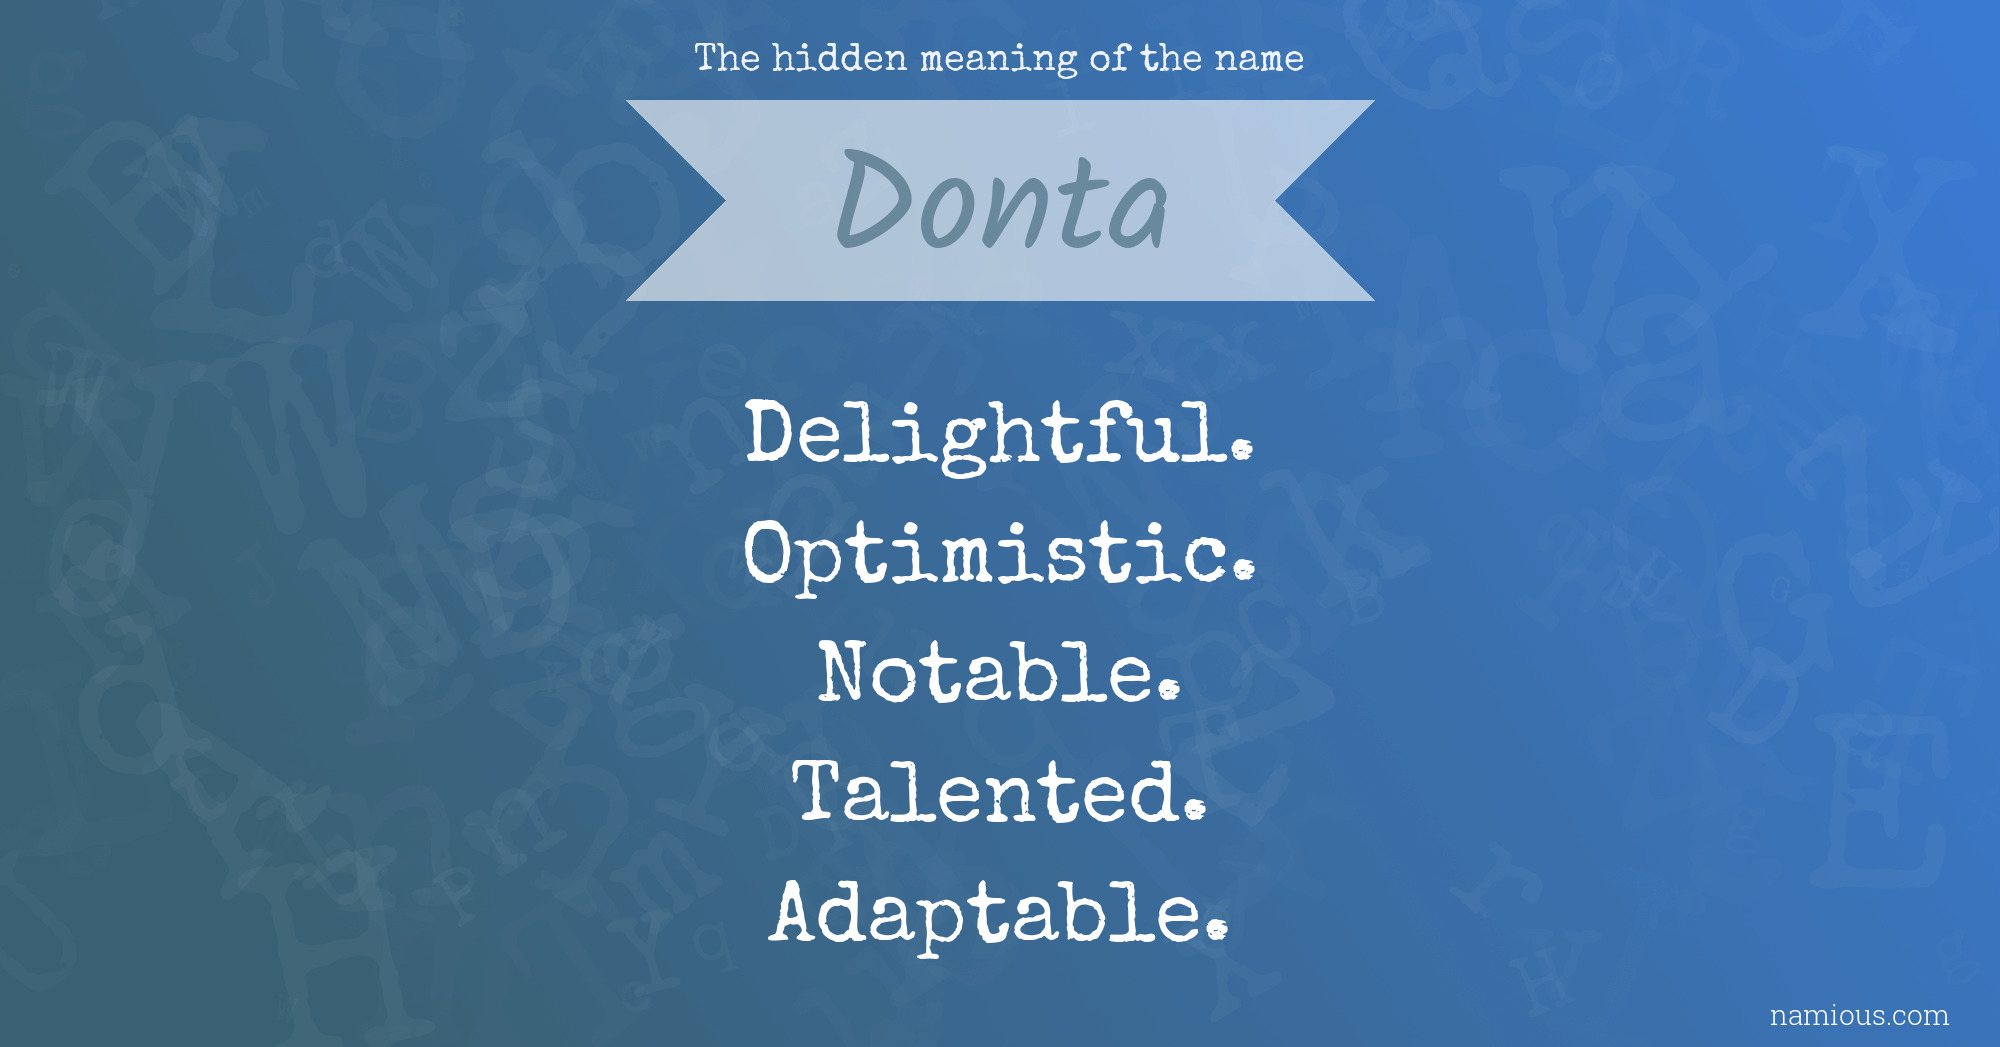 The hidden meaning of the name Donta